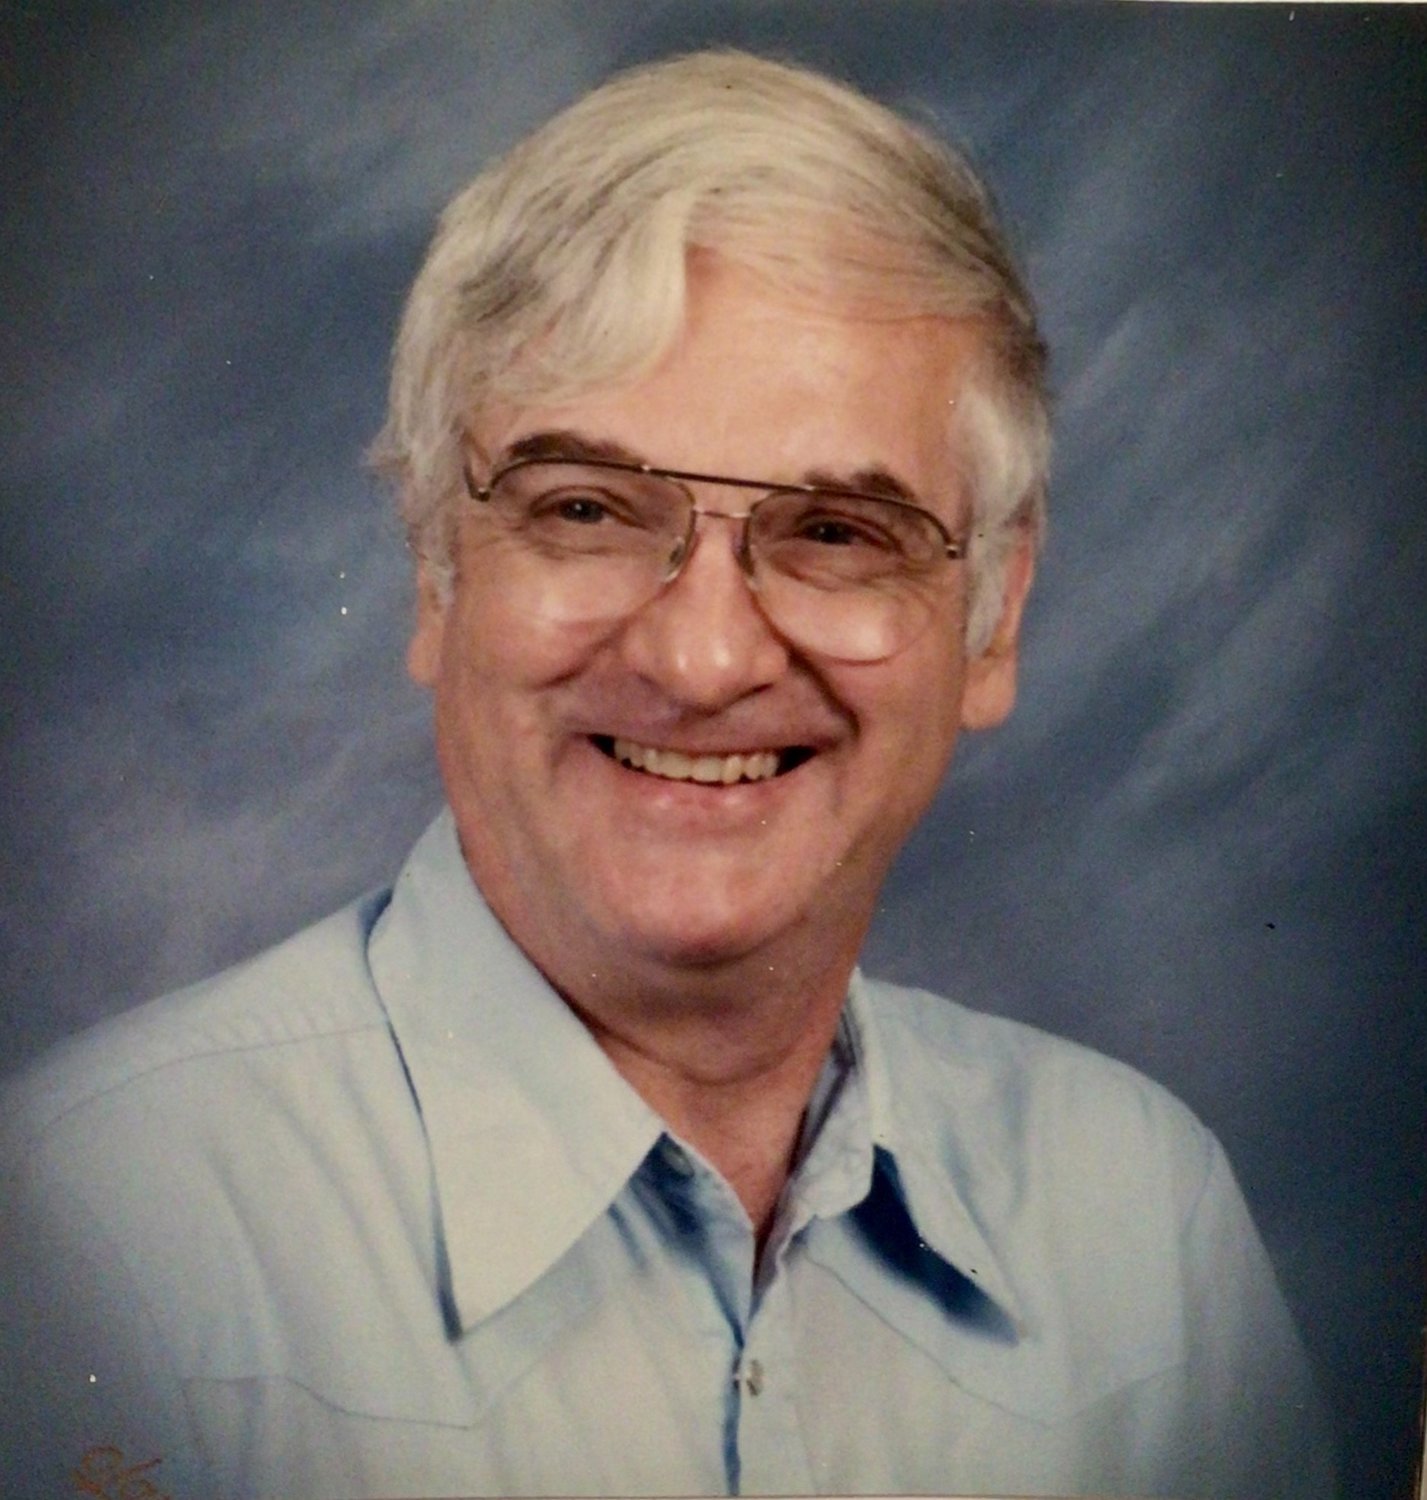 Robert William Arpino, 78 of New Ulm, MN, formerly of Keokuk, died Friday, August 5, 2022 at his home in New Ulm, MN.